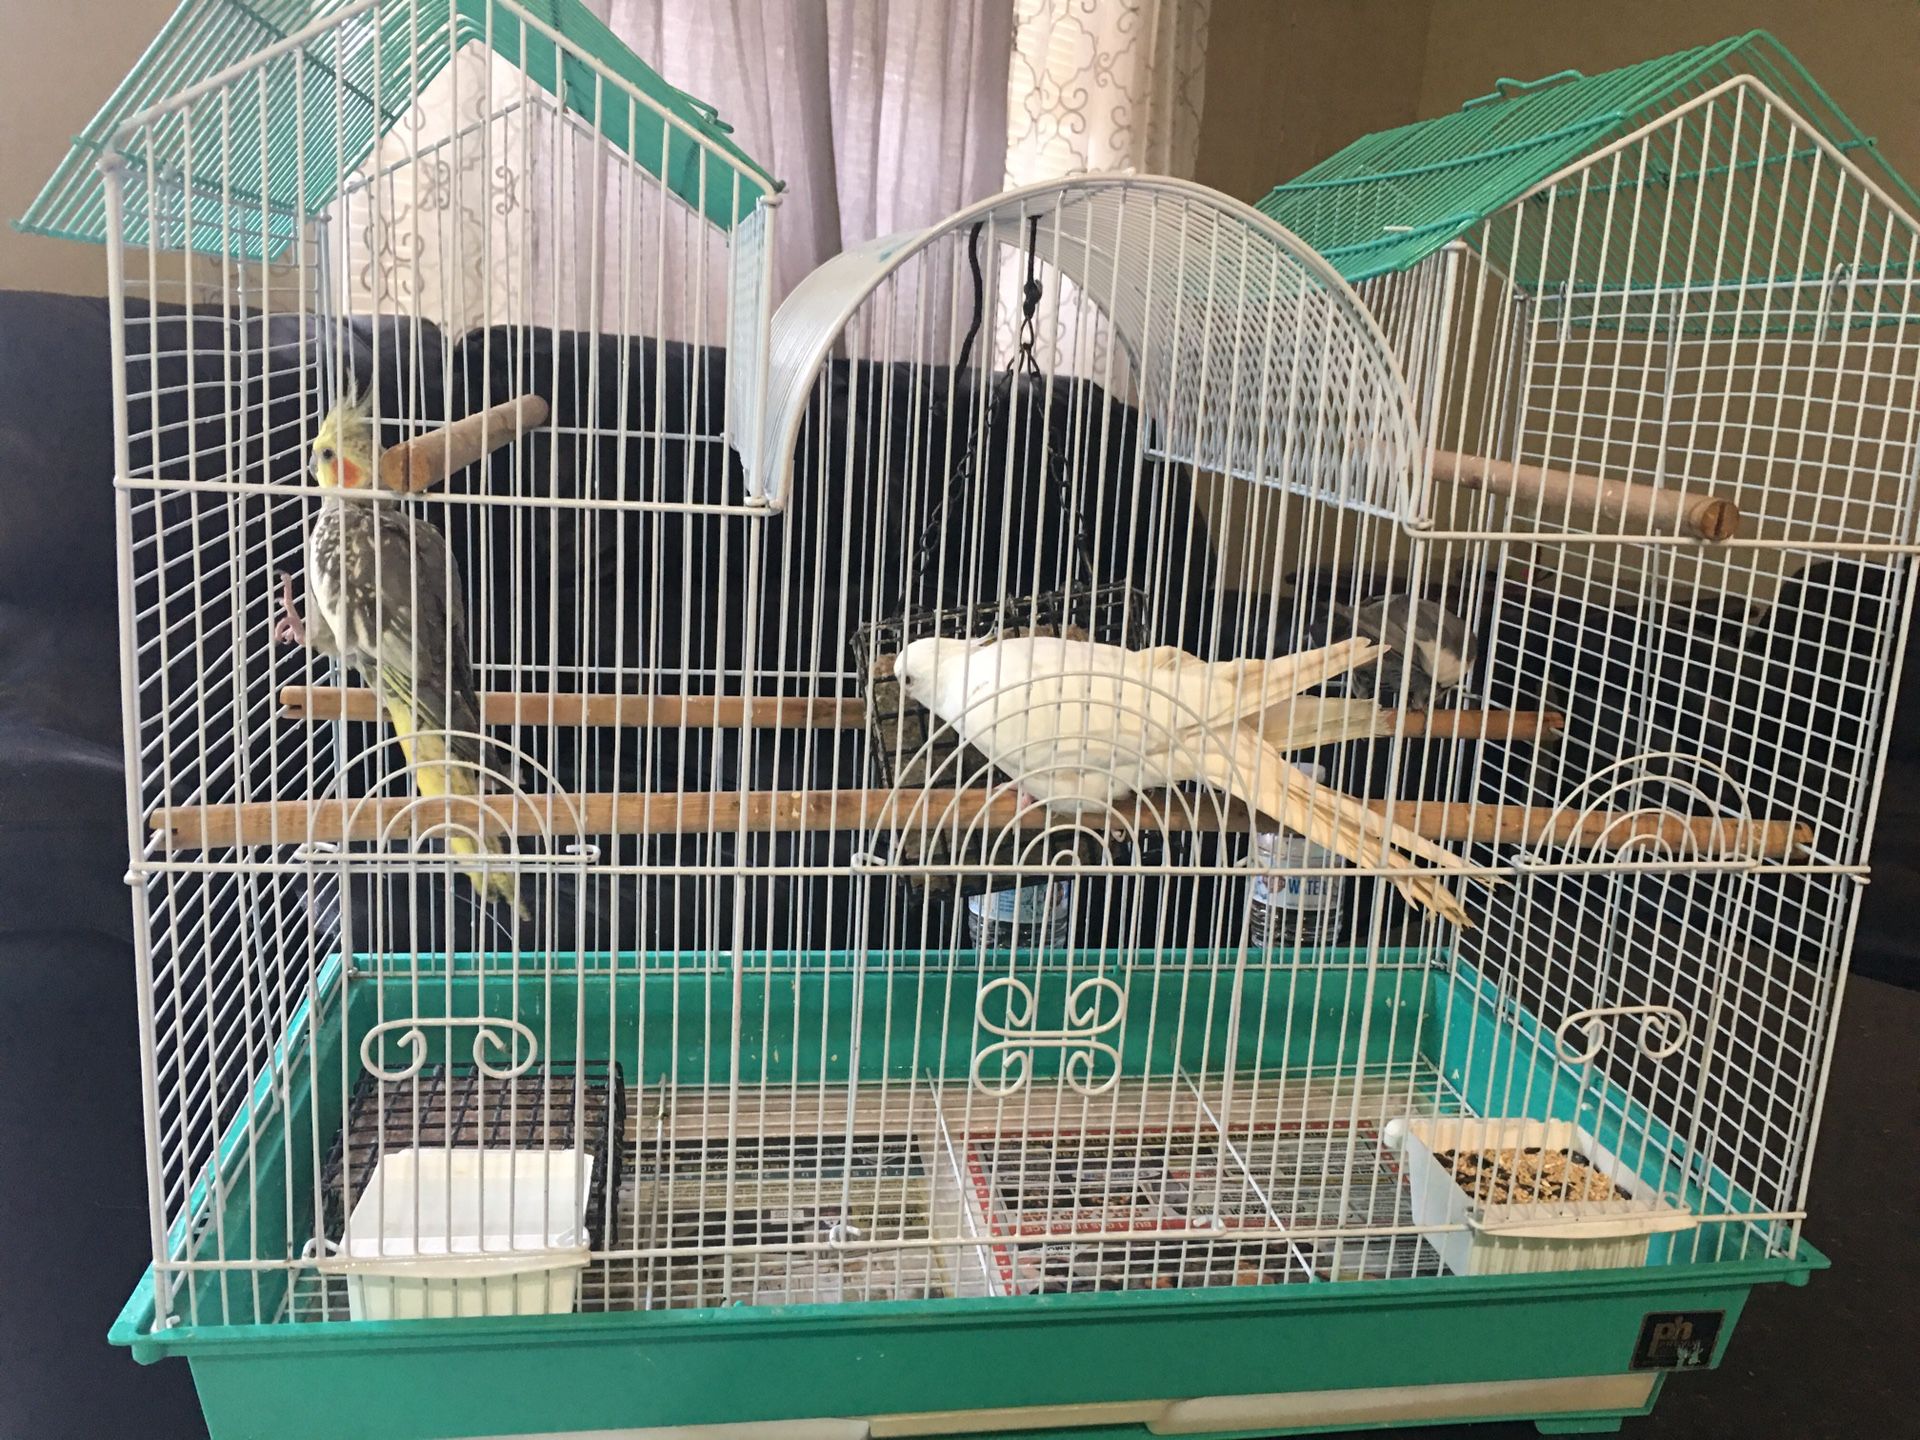 3 bird with a cage